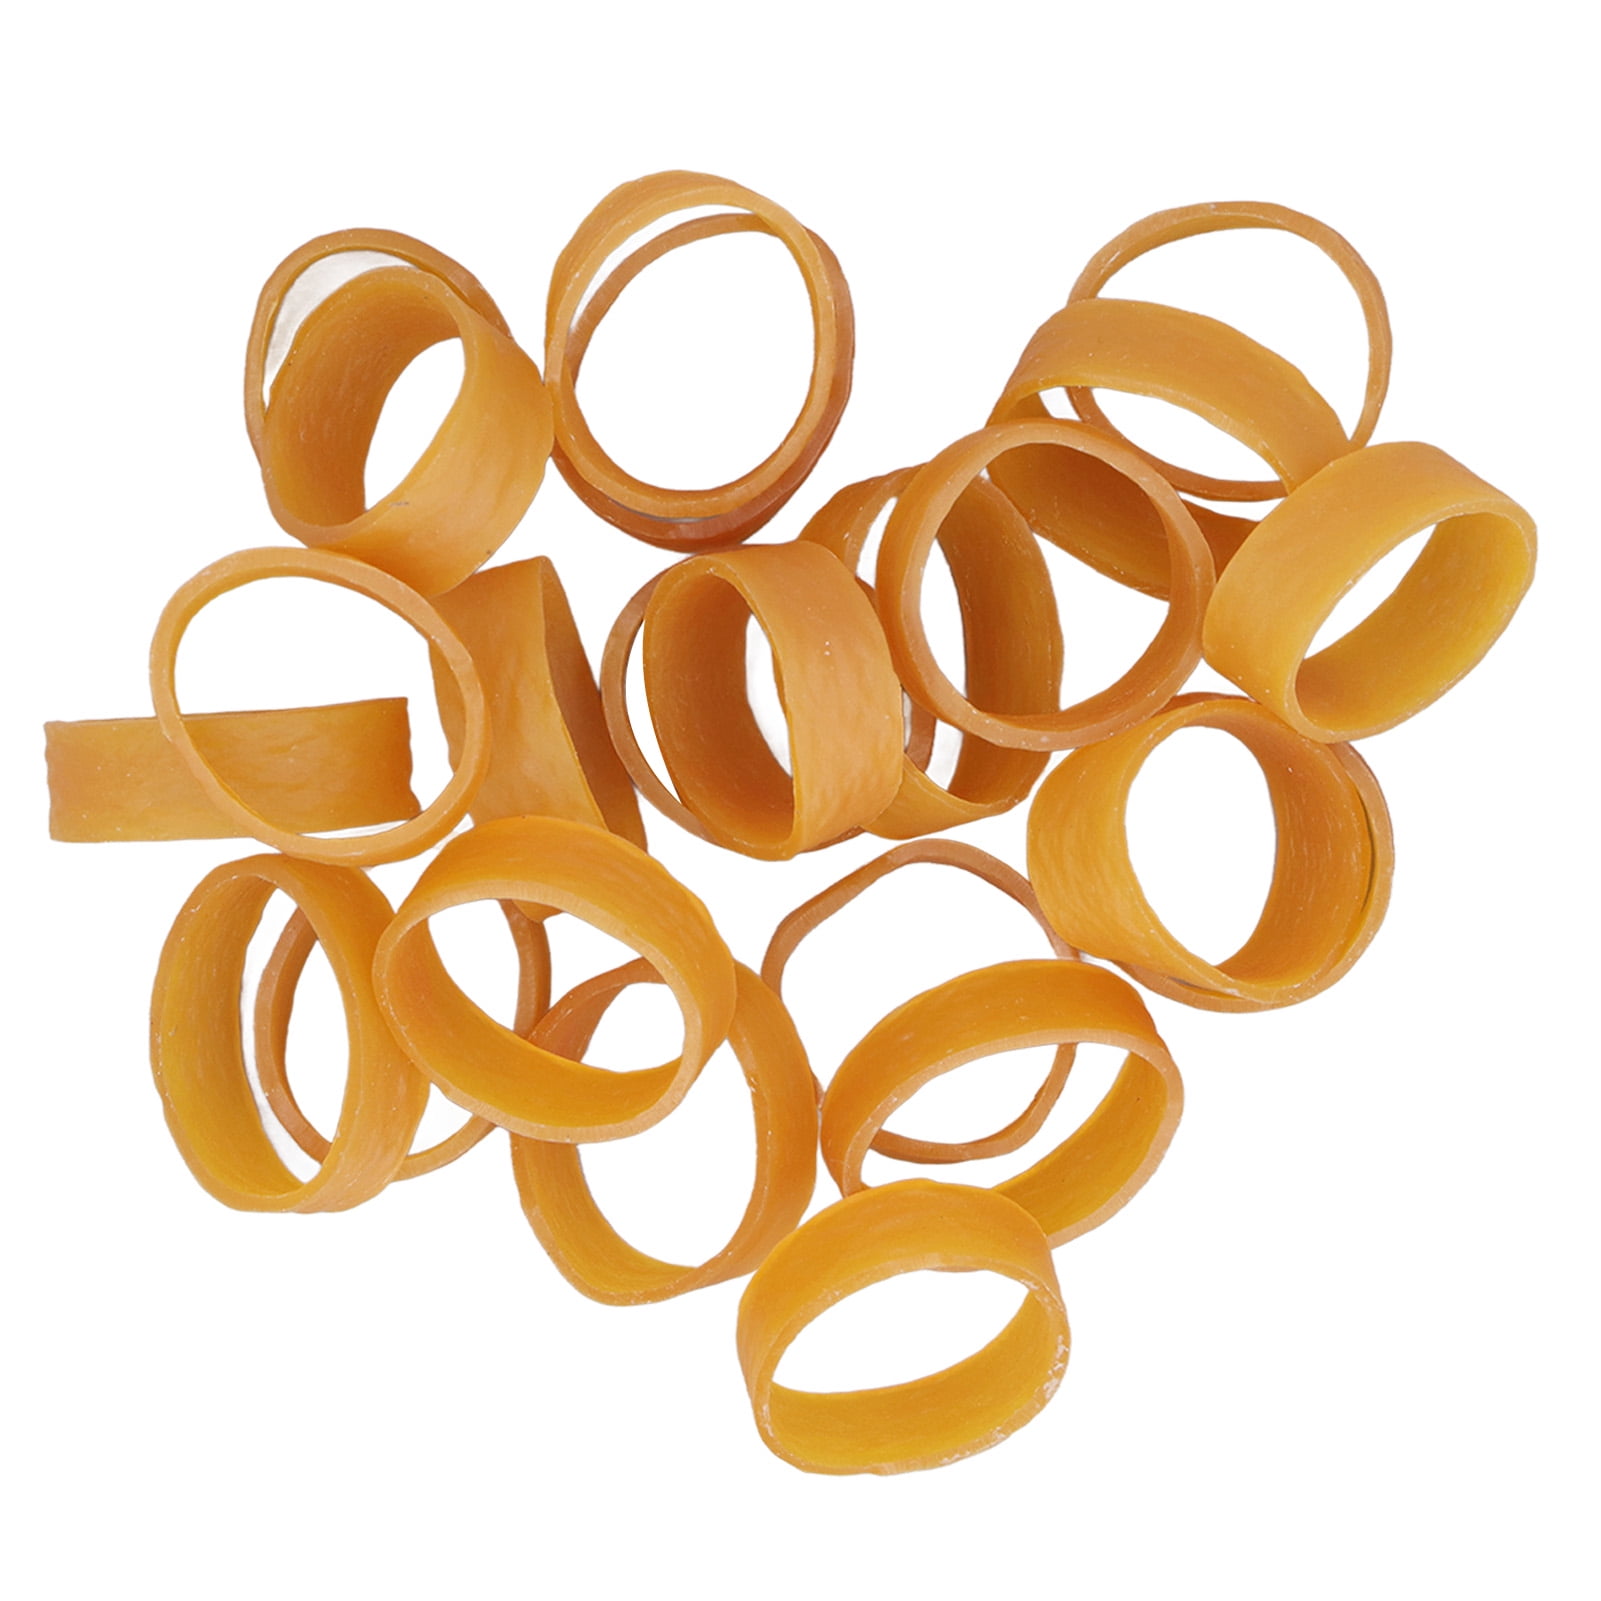 PlasticMill Rubber Bands #33: #33 size, Red, 100 Count.